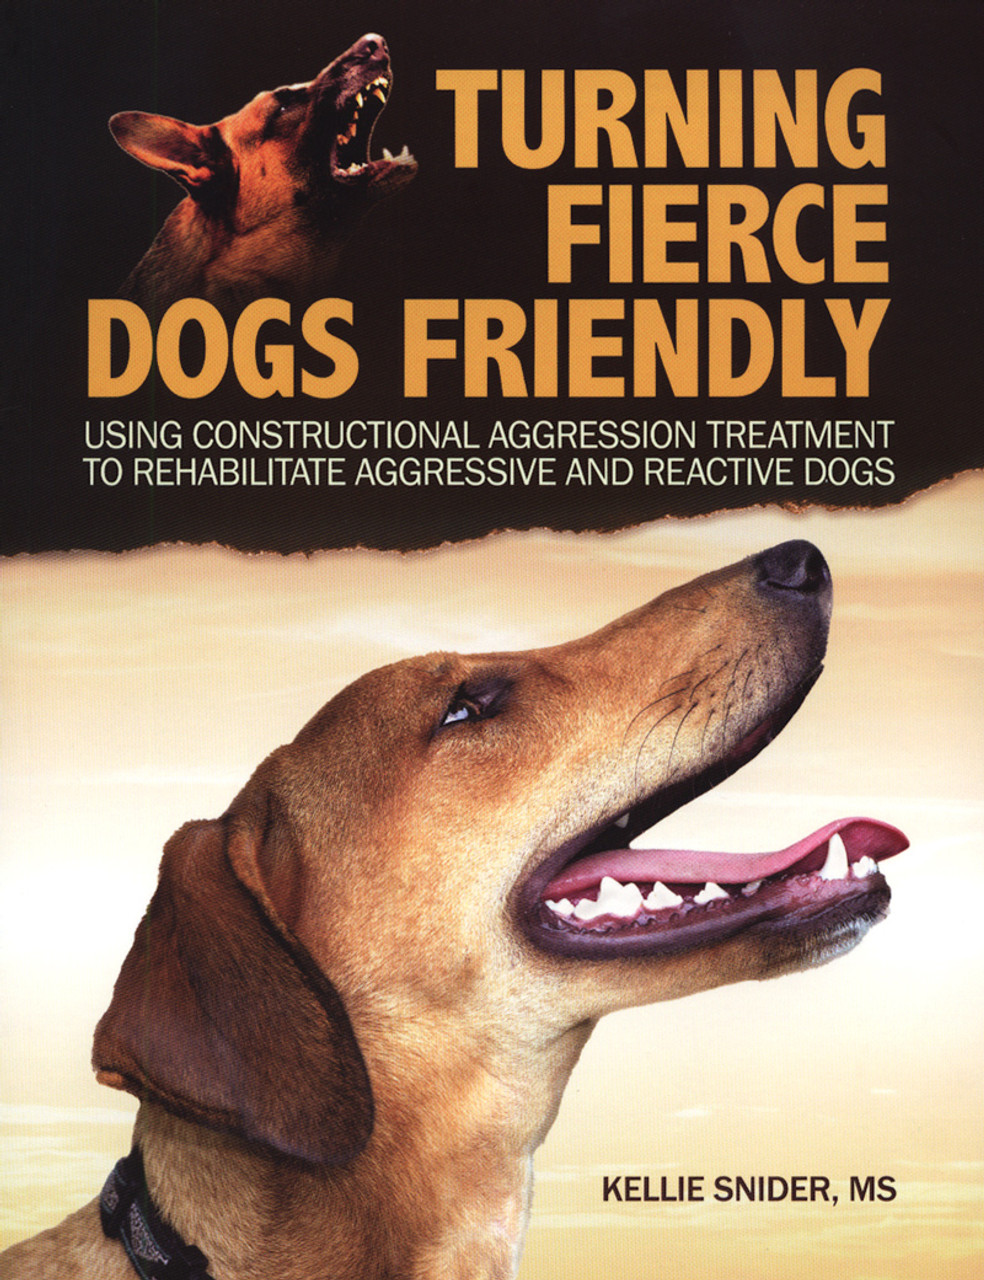 How to Rehabilitate Aggressive Dogs: A Step-by-Step Guide